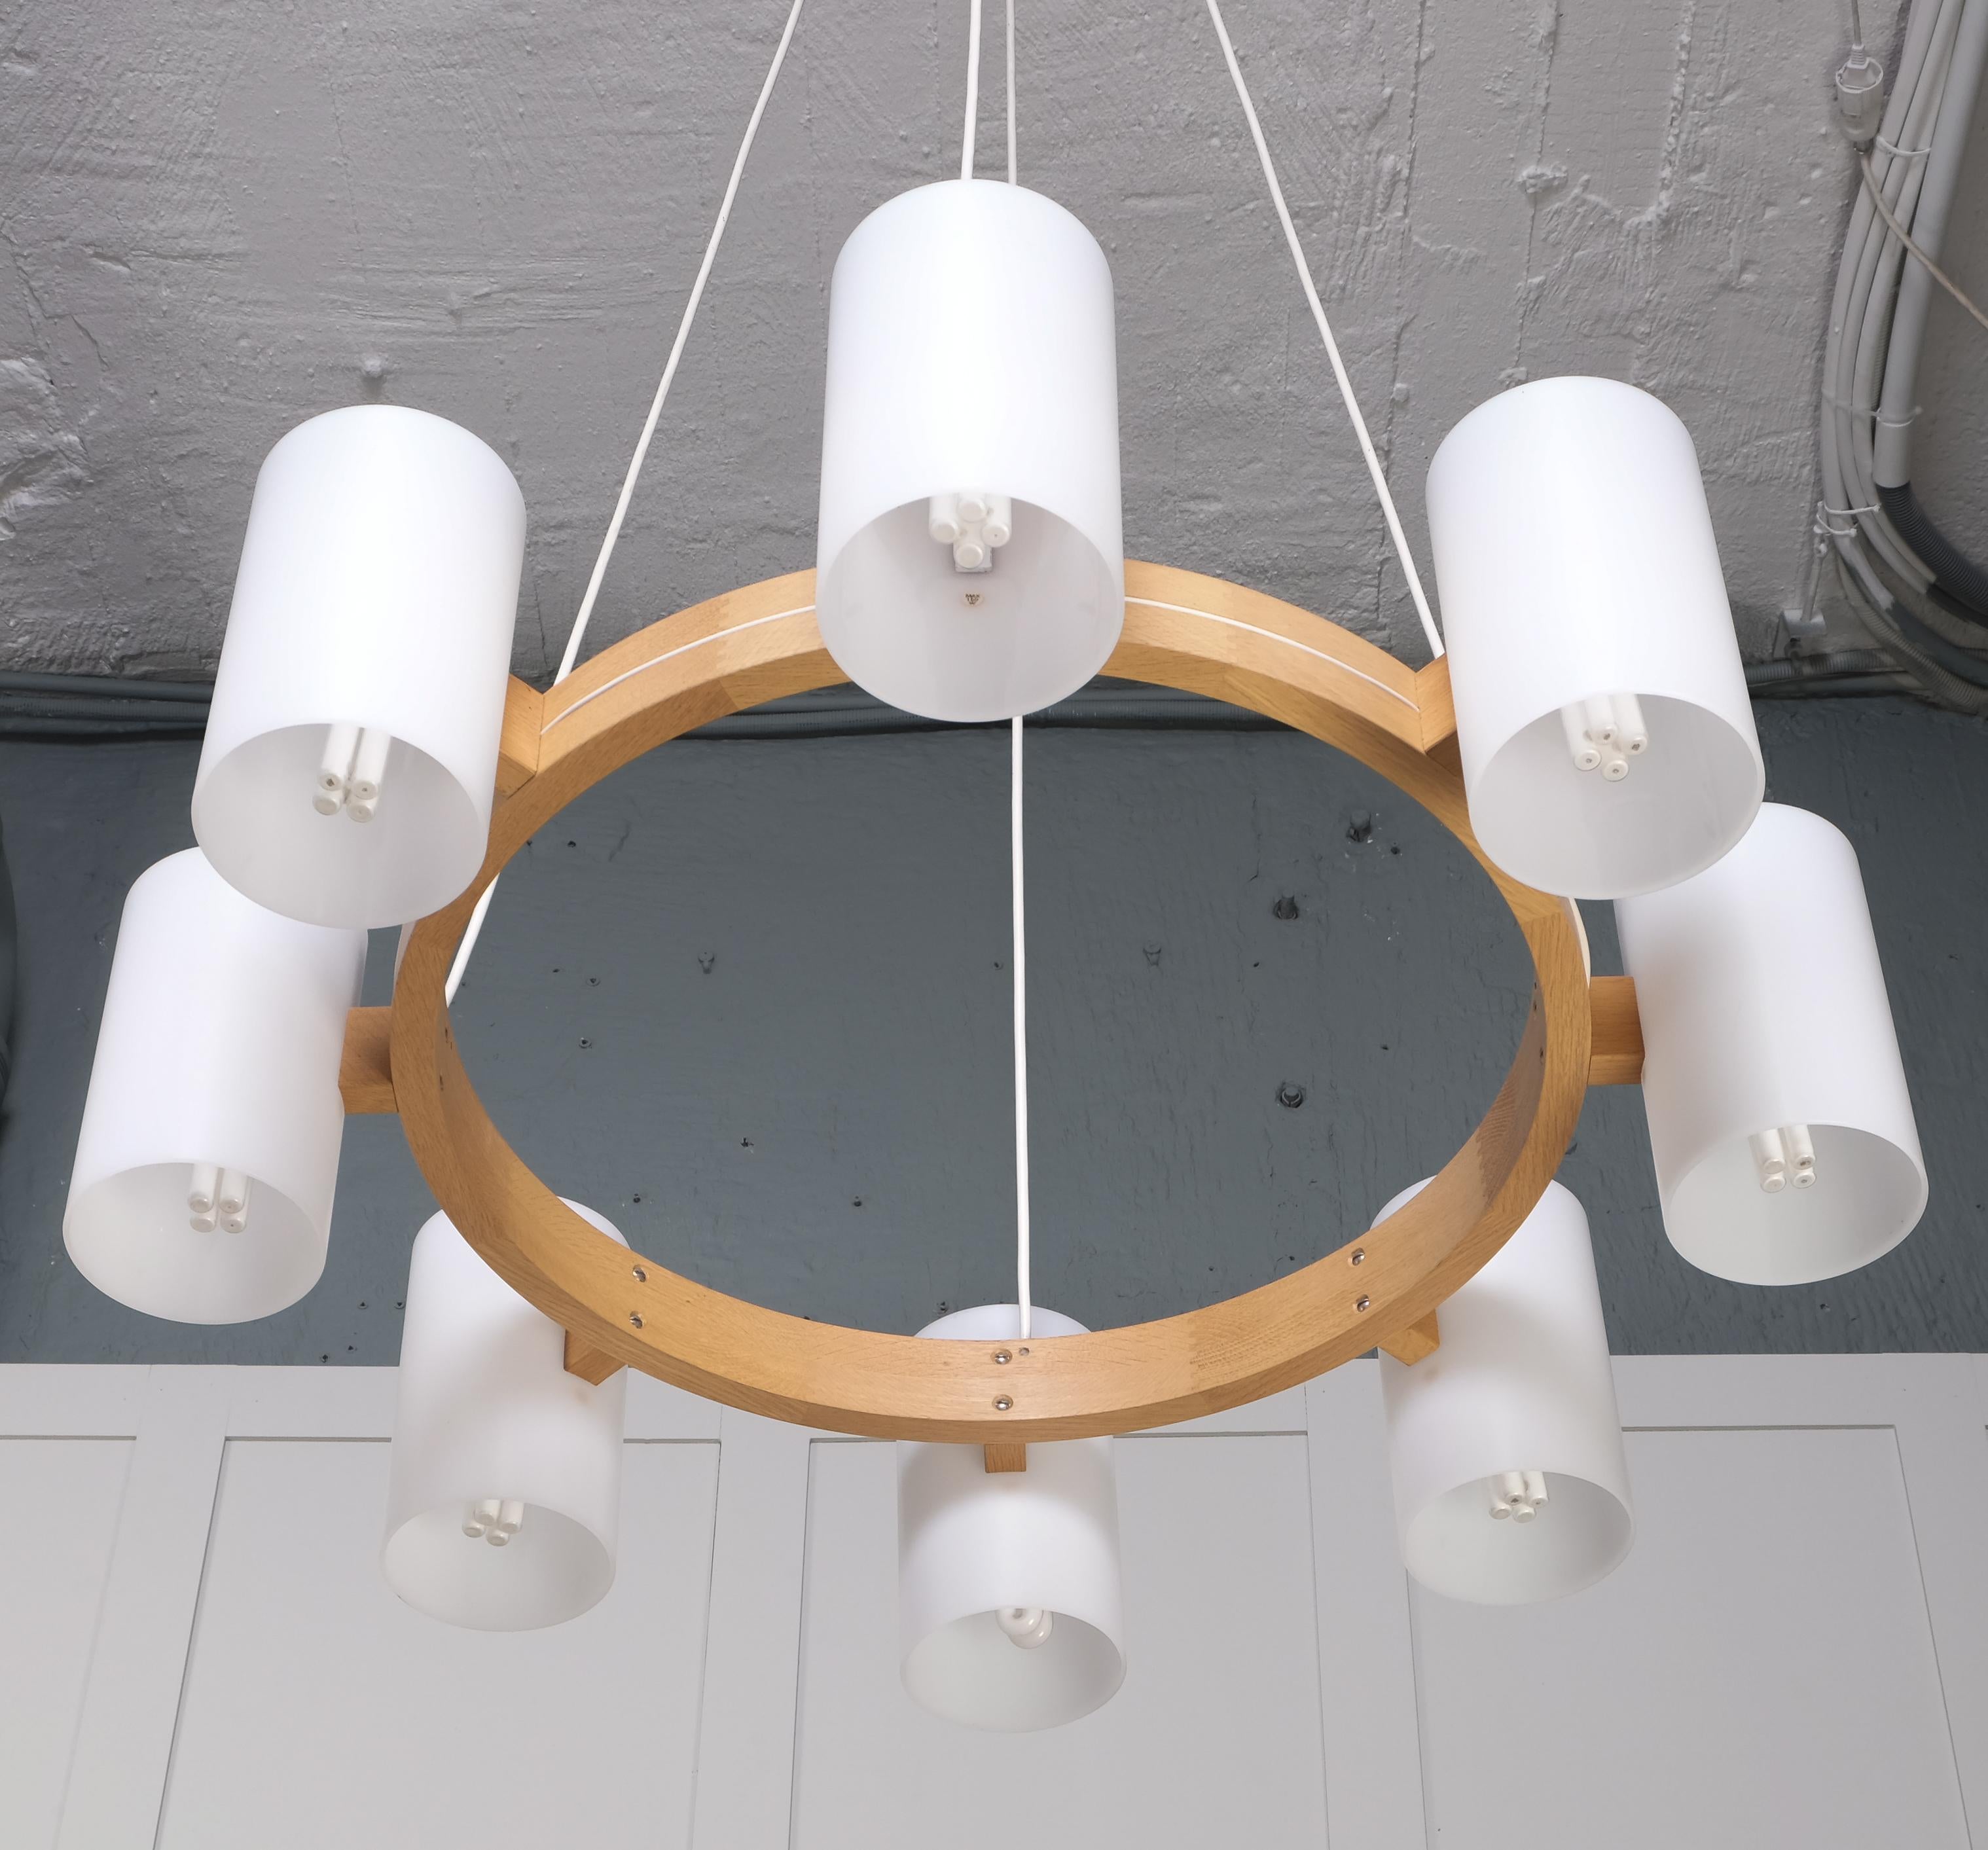 Set of 6 Chandeliers by Uno & Östen Kristiansson for Luxus, 1960s For Sale 6